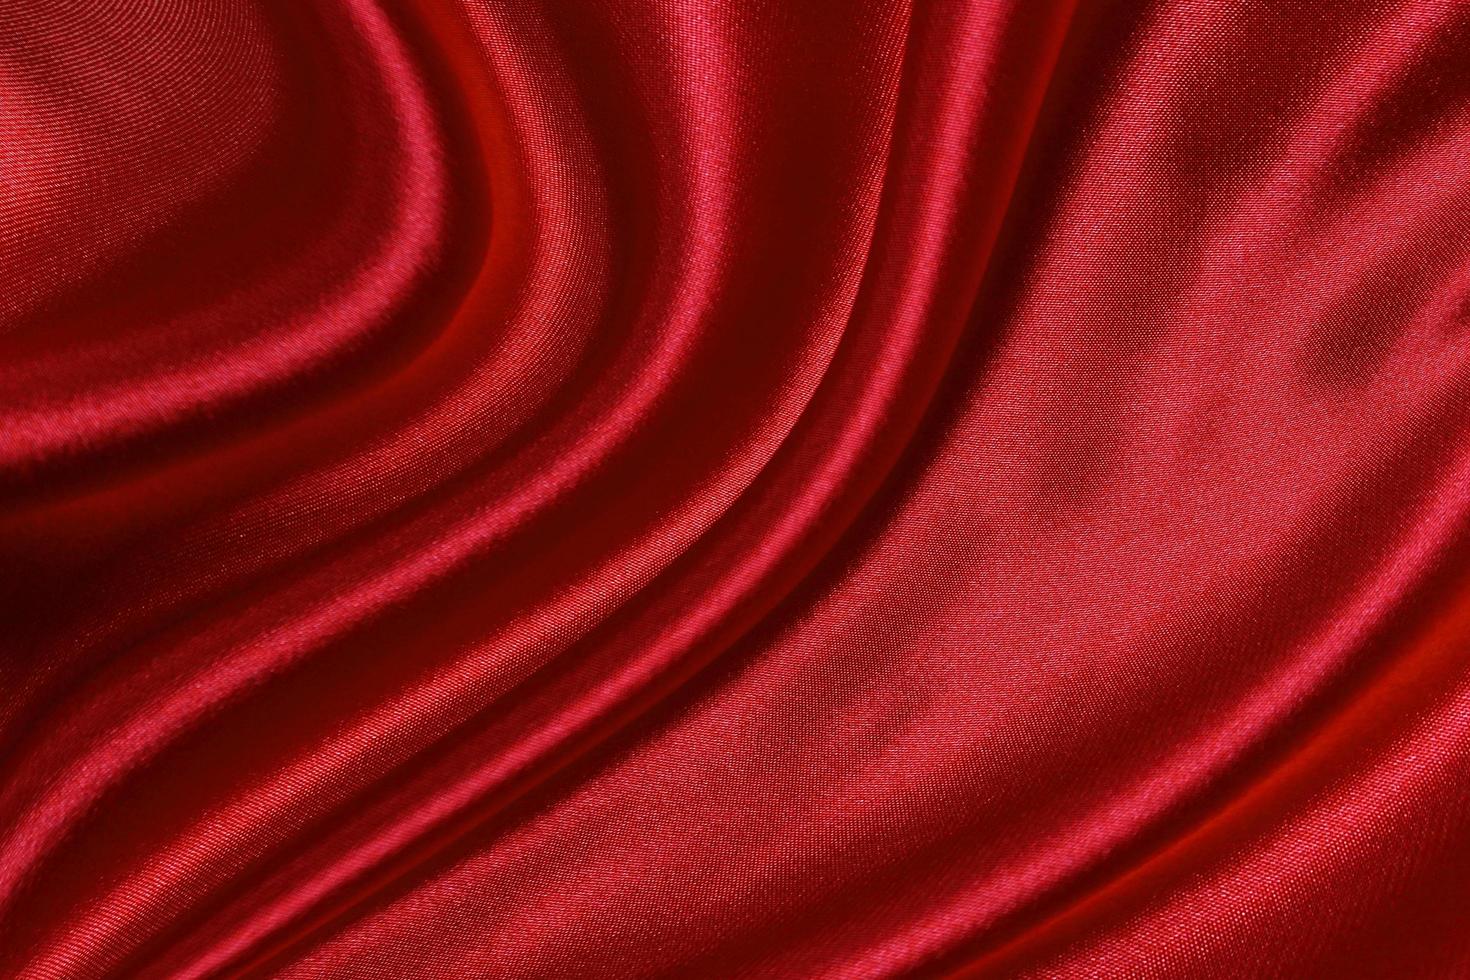 Red silk or satin luxury fabric texture can use as abstract background. Top view photo